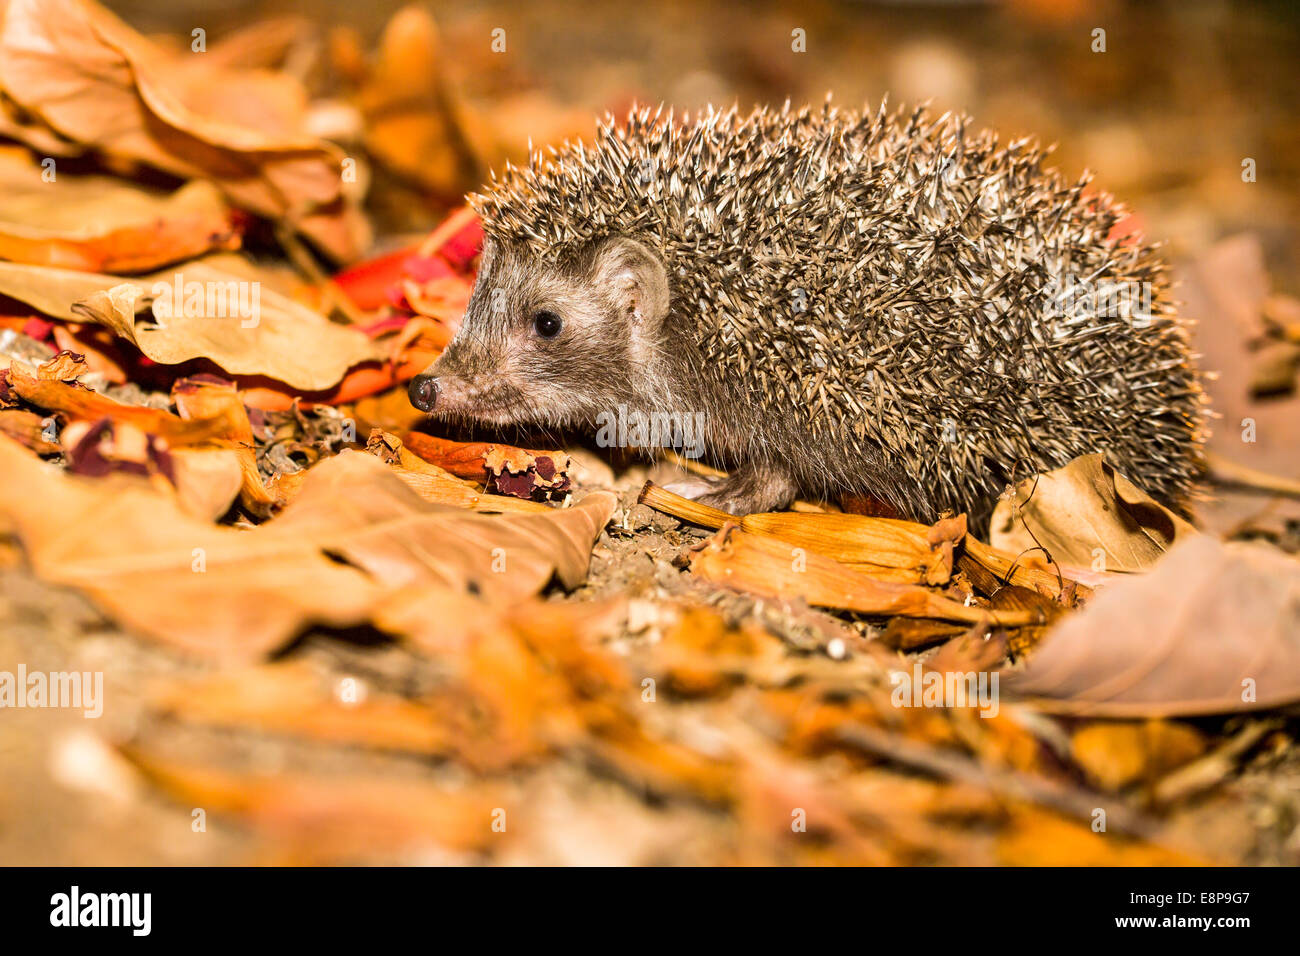 Eastern European hedgehog, Erinaceus concolor, Israel. The hedgehog is an omnivore and has been known to eat a wide range of inv Stock Photo